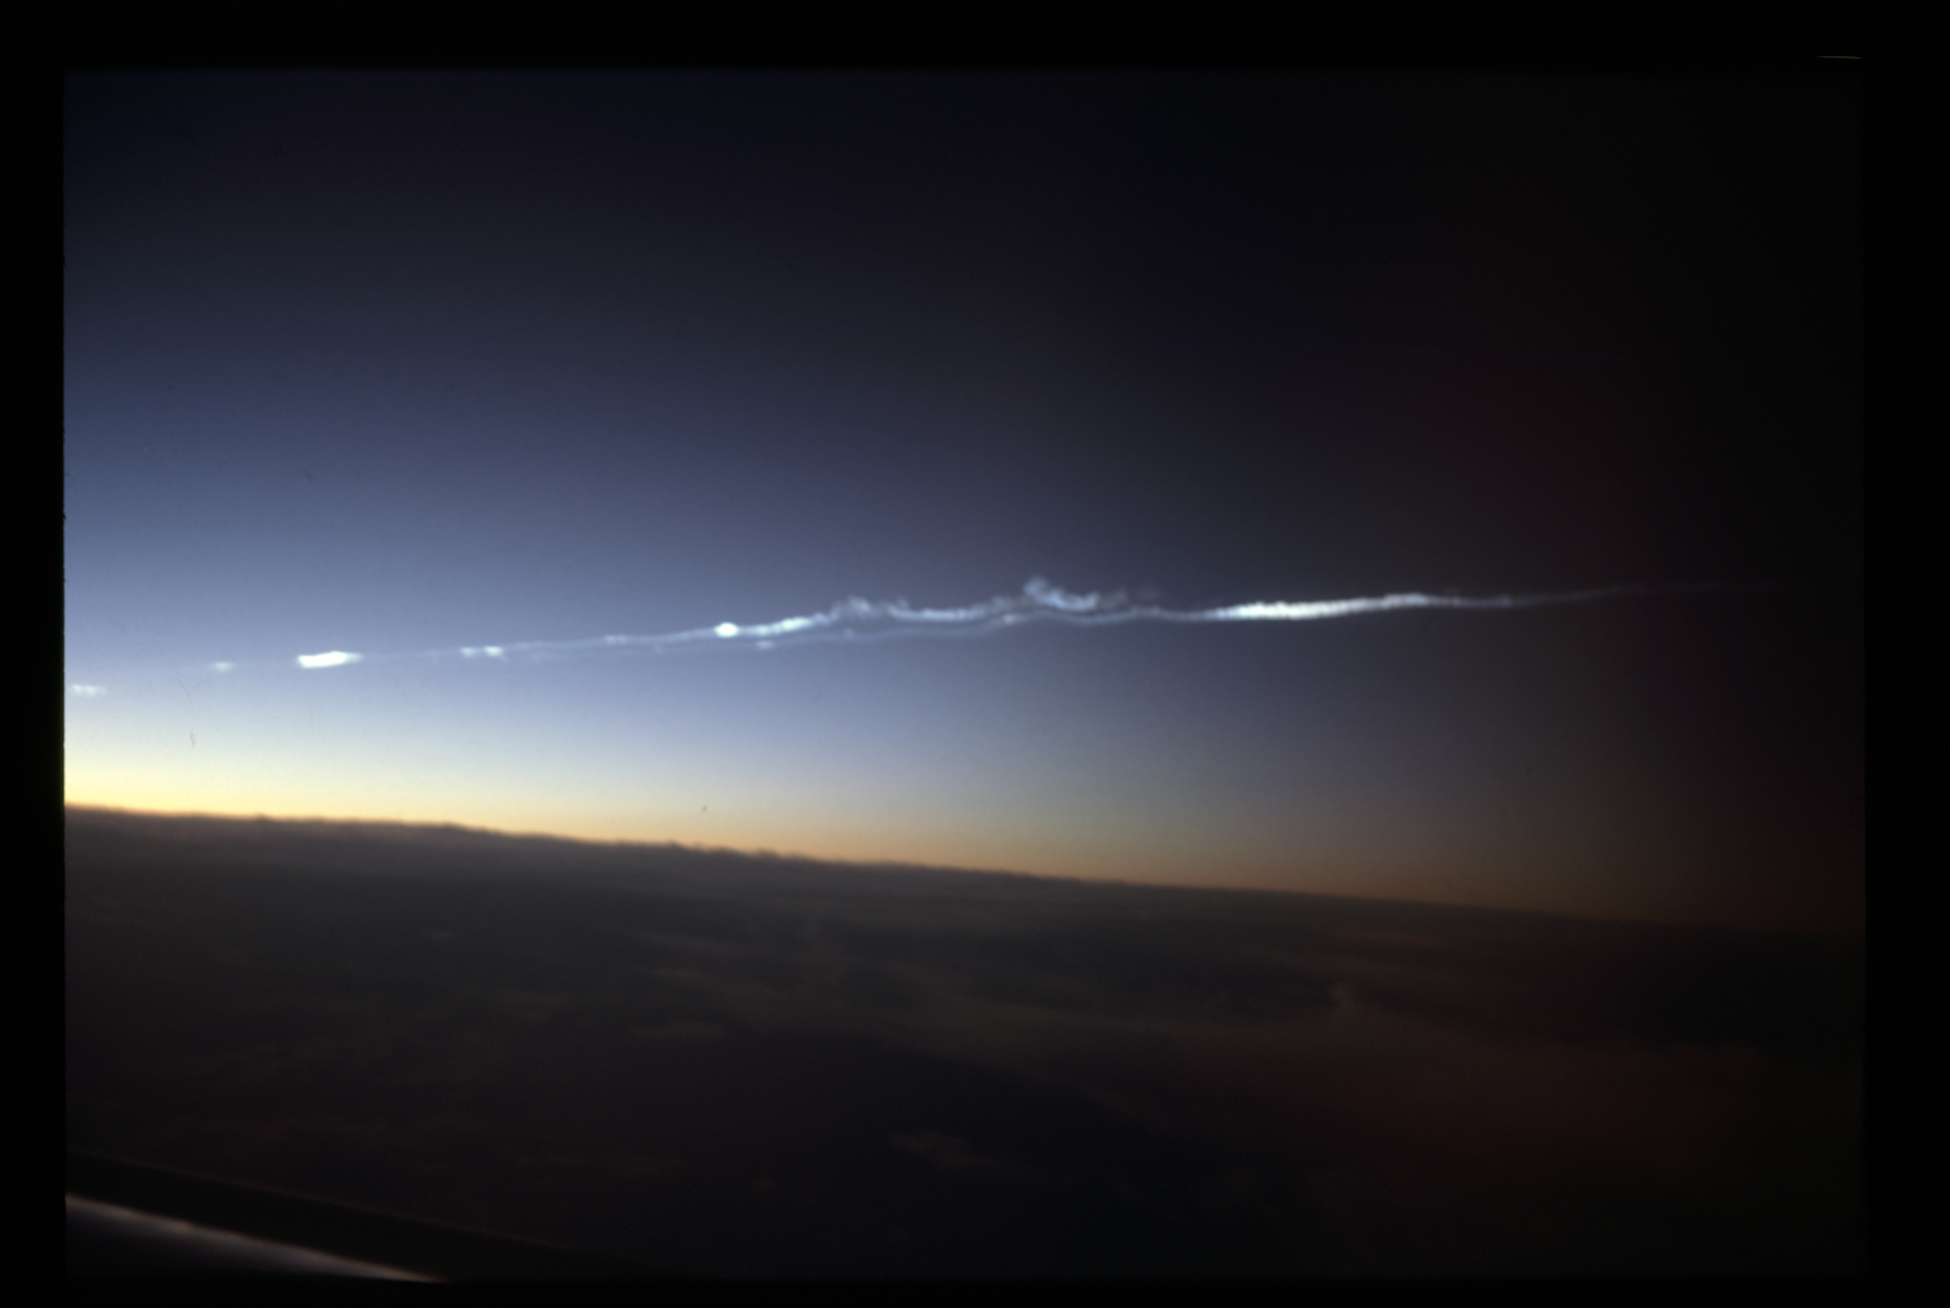 Apollo 13 re-entry trails from DC-8